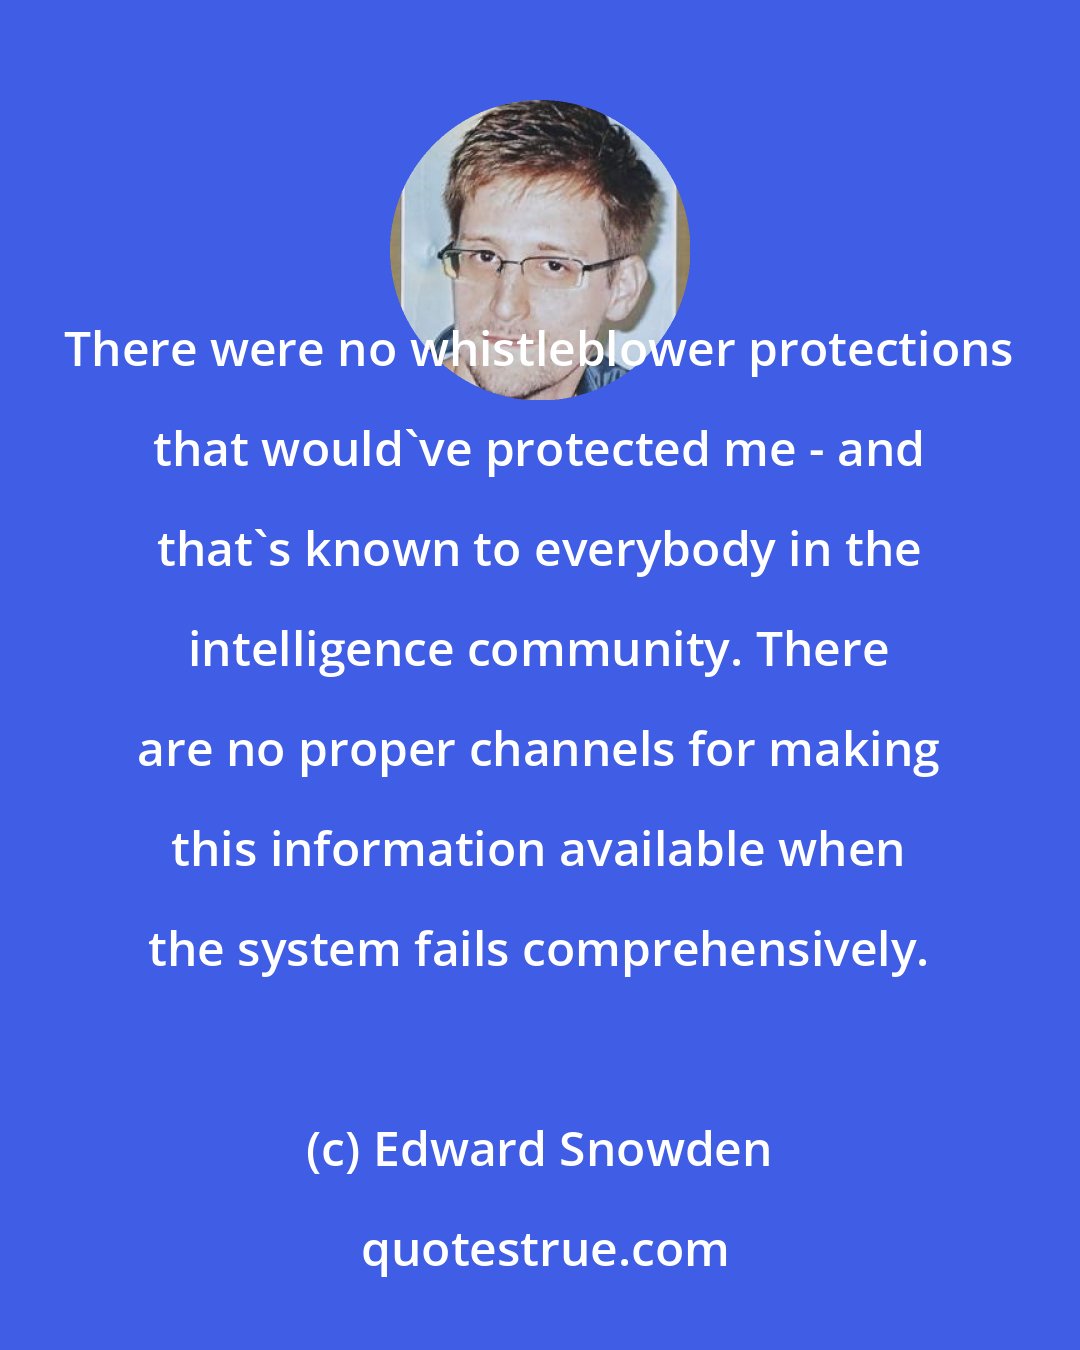 Edward Snowden: There were no whistleblower protections that would've protected me - and that's known to everybody in the intelligence community. There are no proper channels for making this information available when the system fails comprehensively.